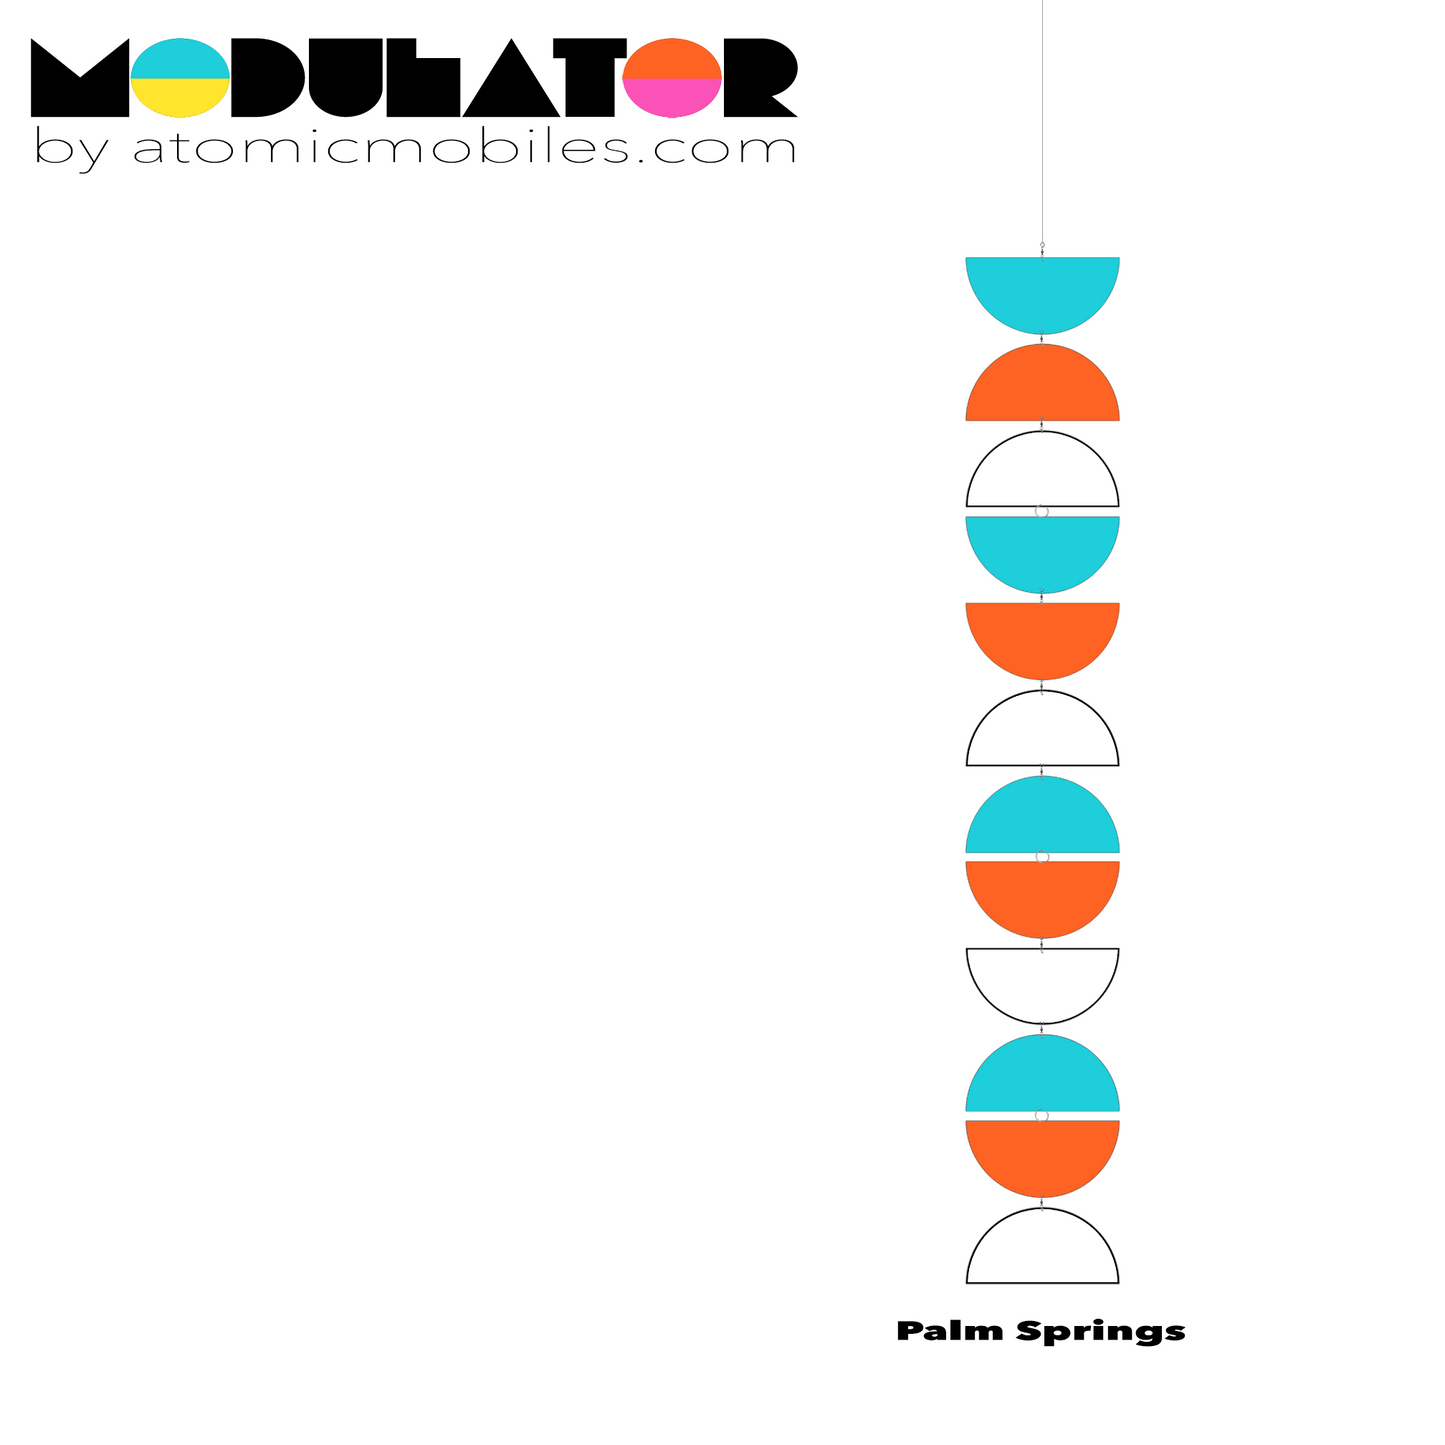 MODulator Vertical Art Mobile - retro mid century modern style hanging art mobile in Palm Springs colors of Aqua, Orange and White by AtomicMobiles.com